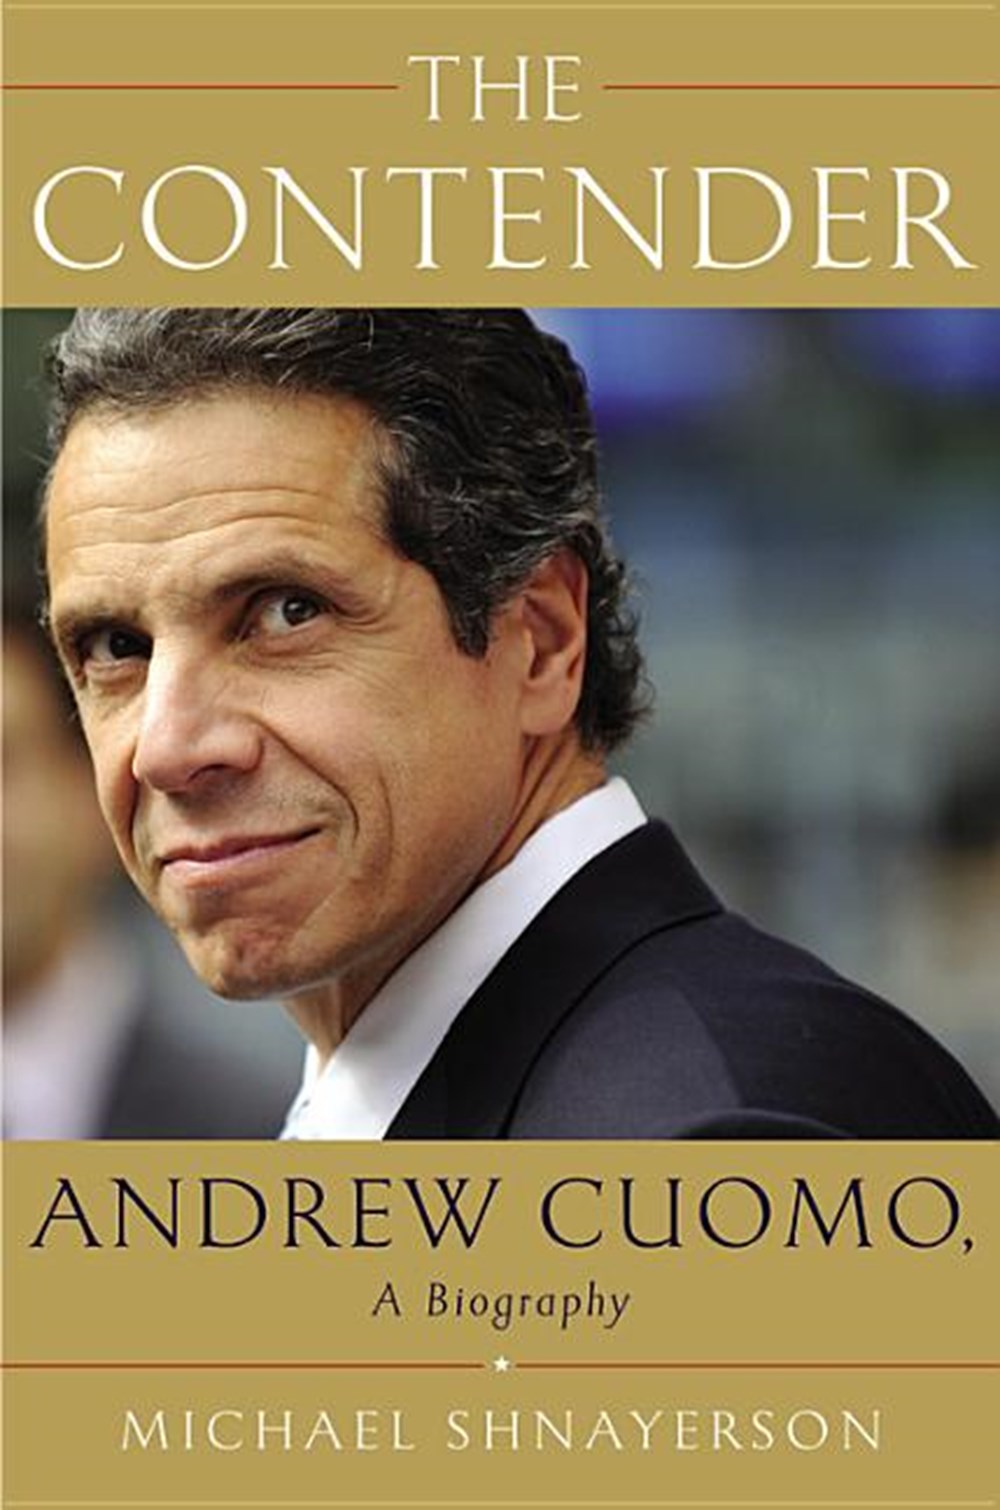 Contender: Andrew Cuomo, a Biography